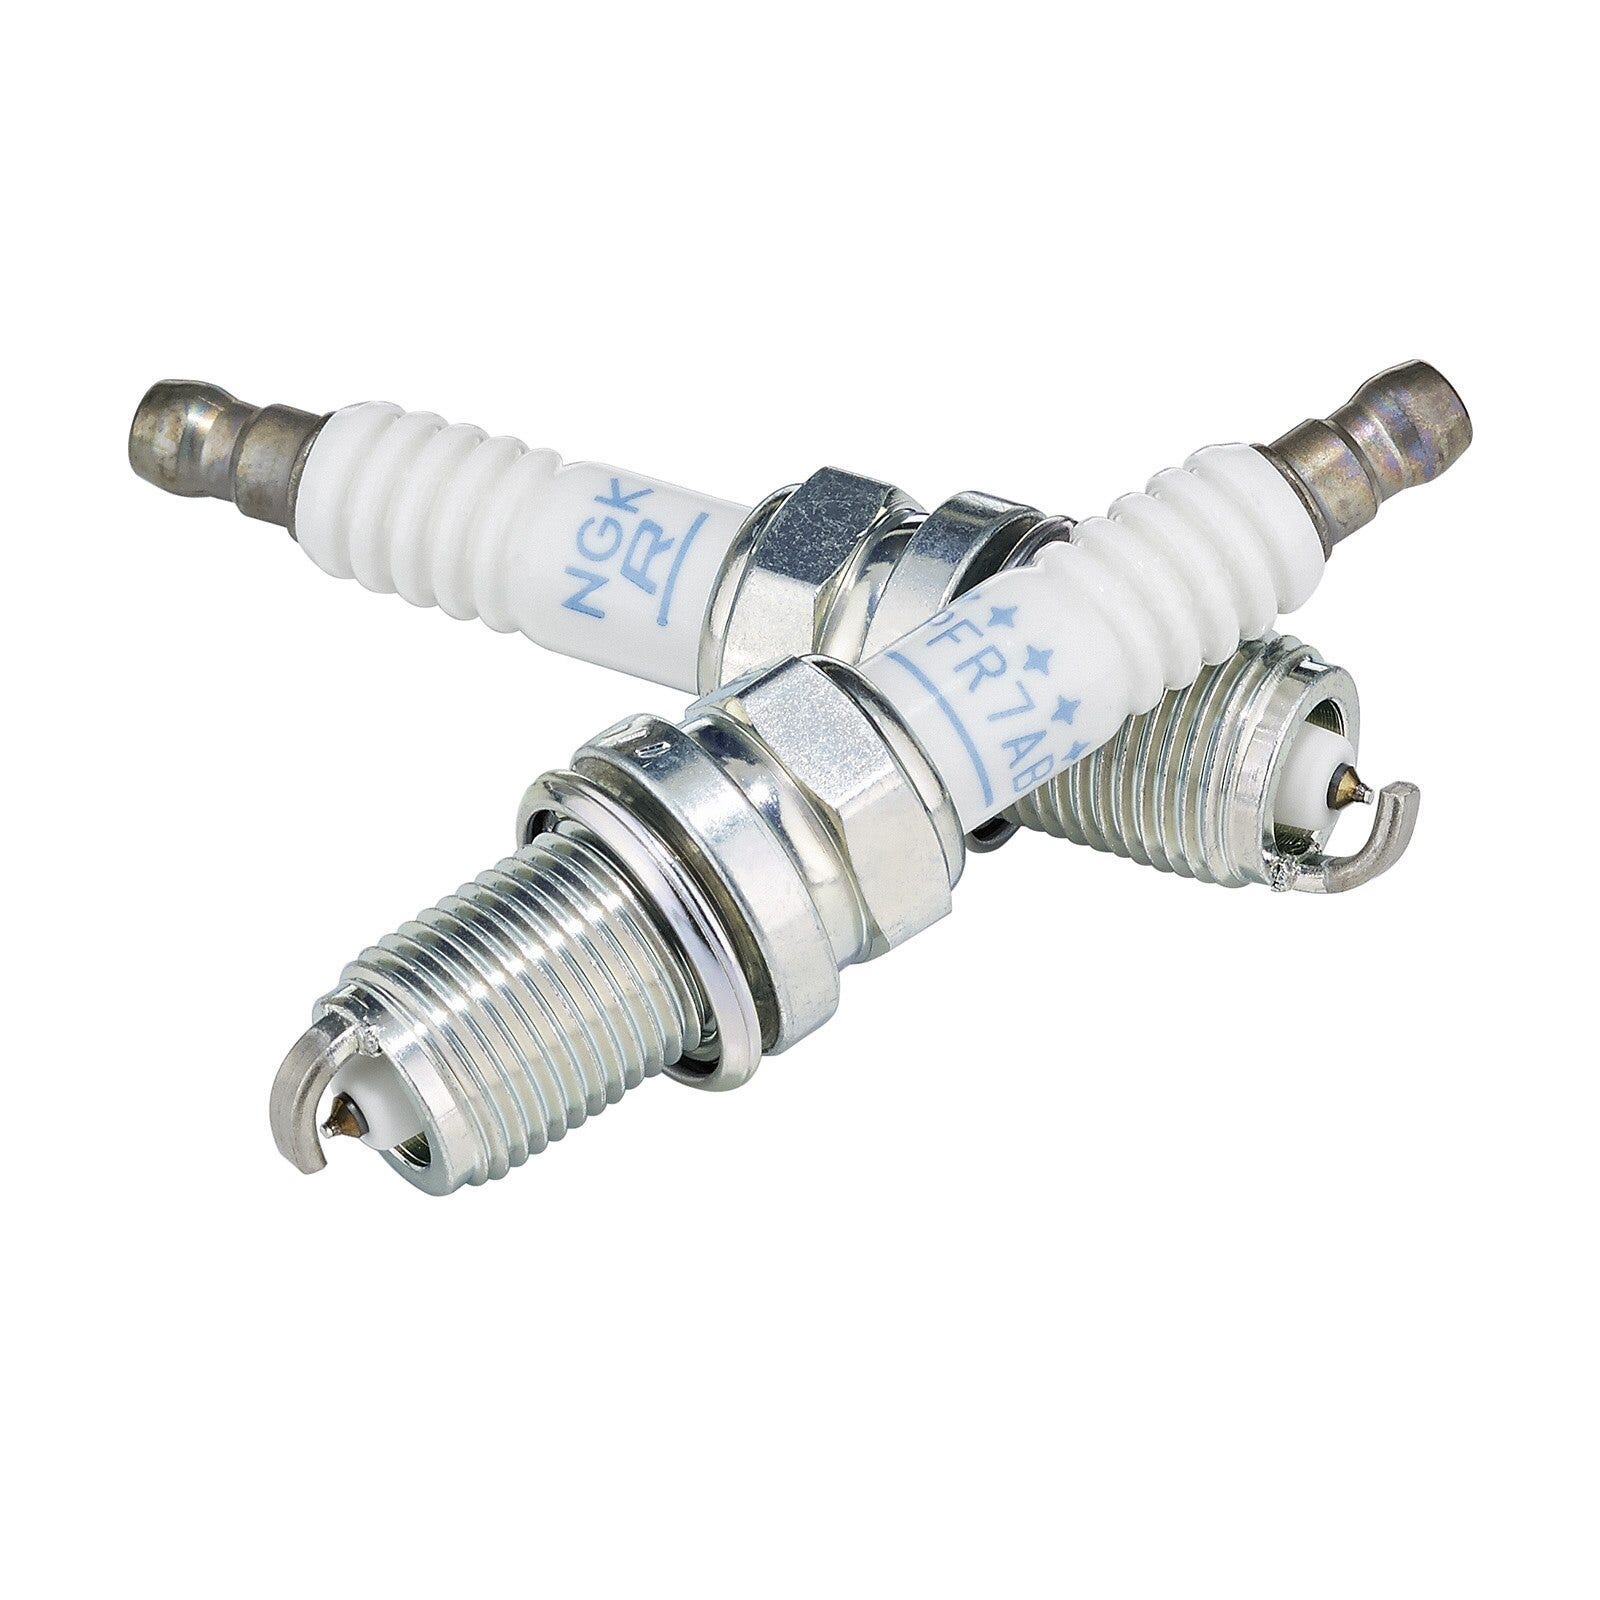 NGK Spark Plugs - 219703120 - The Parts Lodge